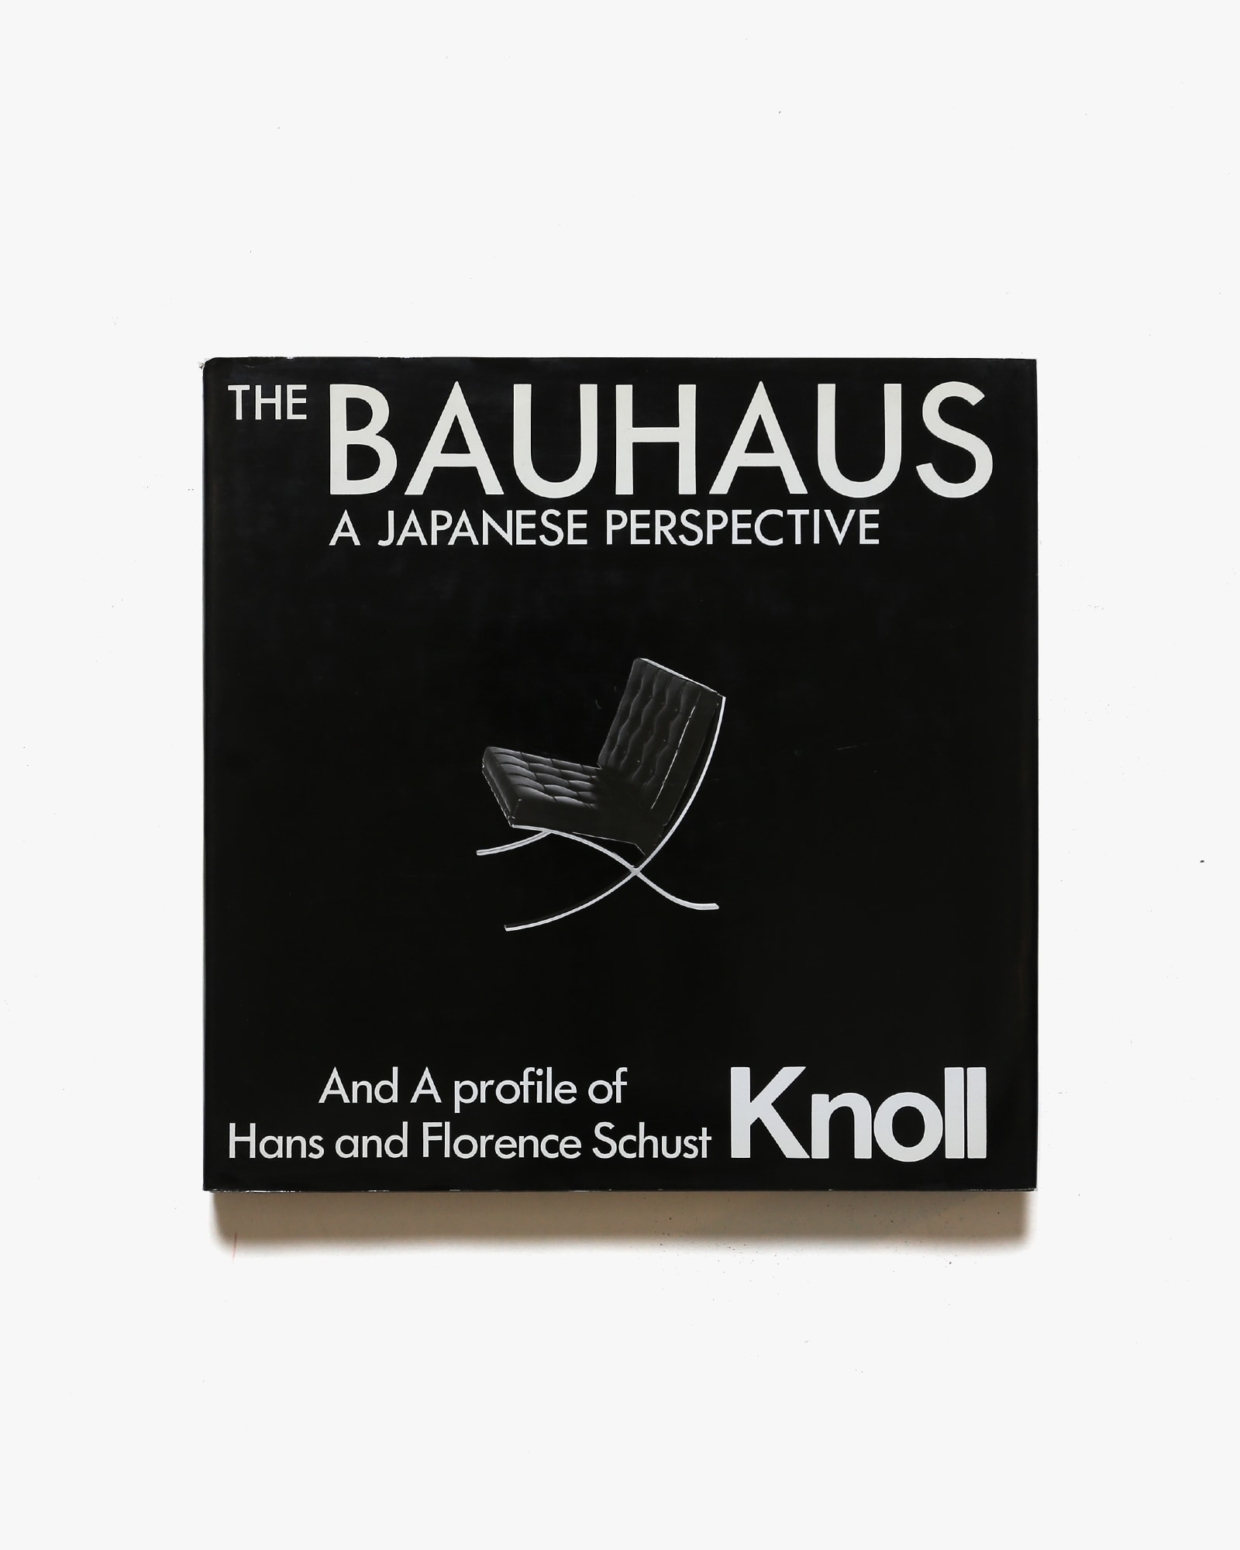 The Bauhaus : A Japanese Perspective and a profile of Hans and Florence Schust Knoll | 井筒昭雄